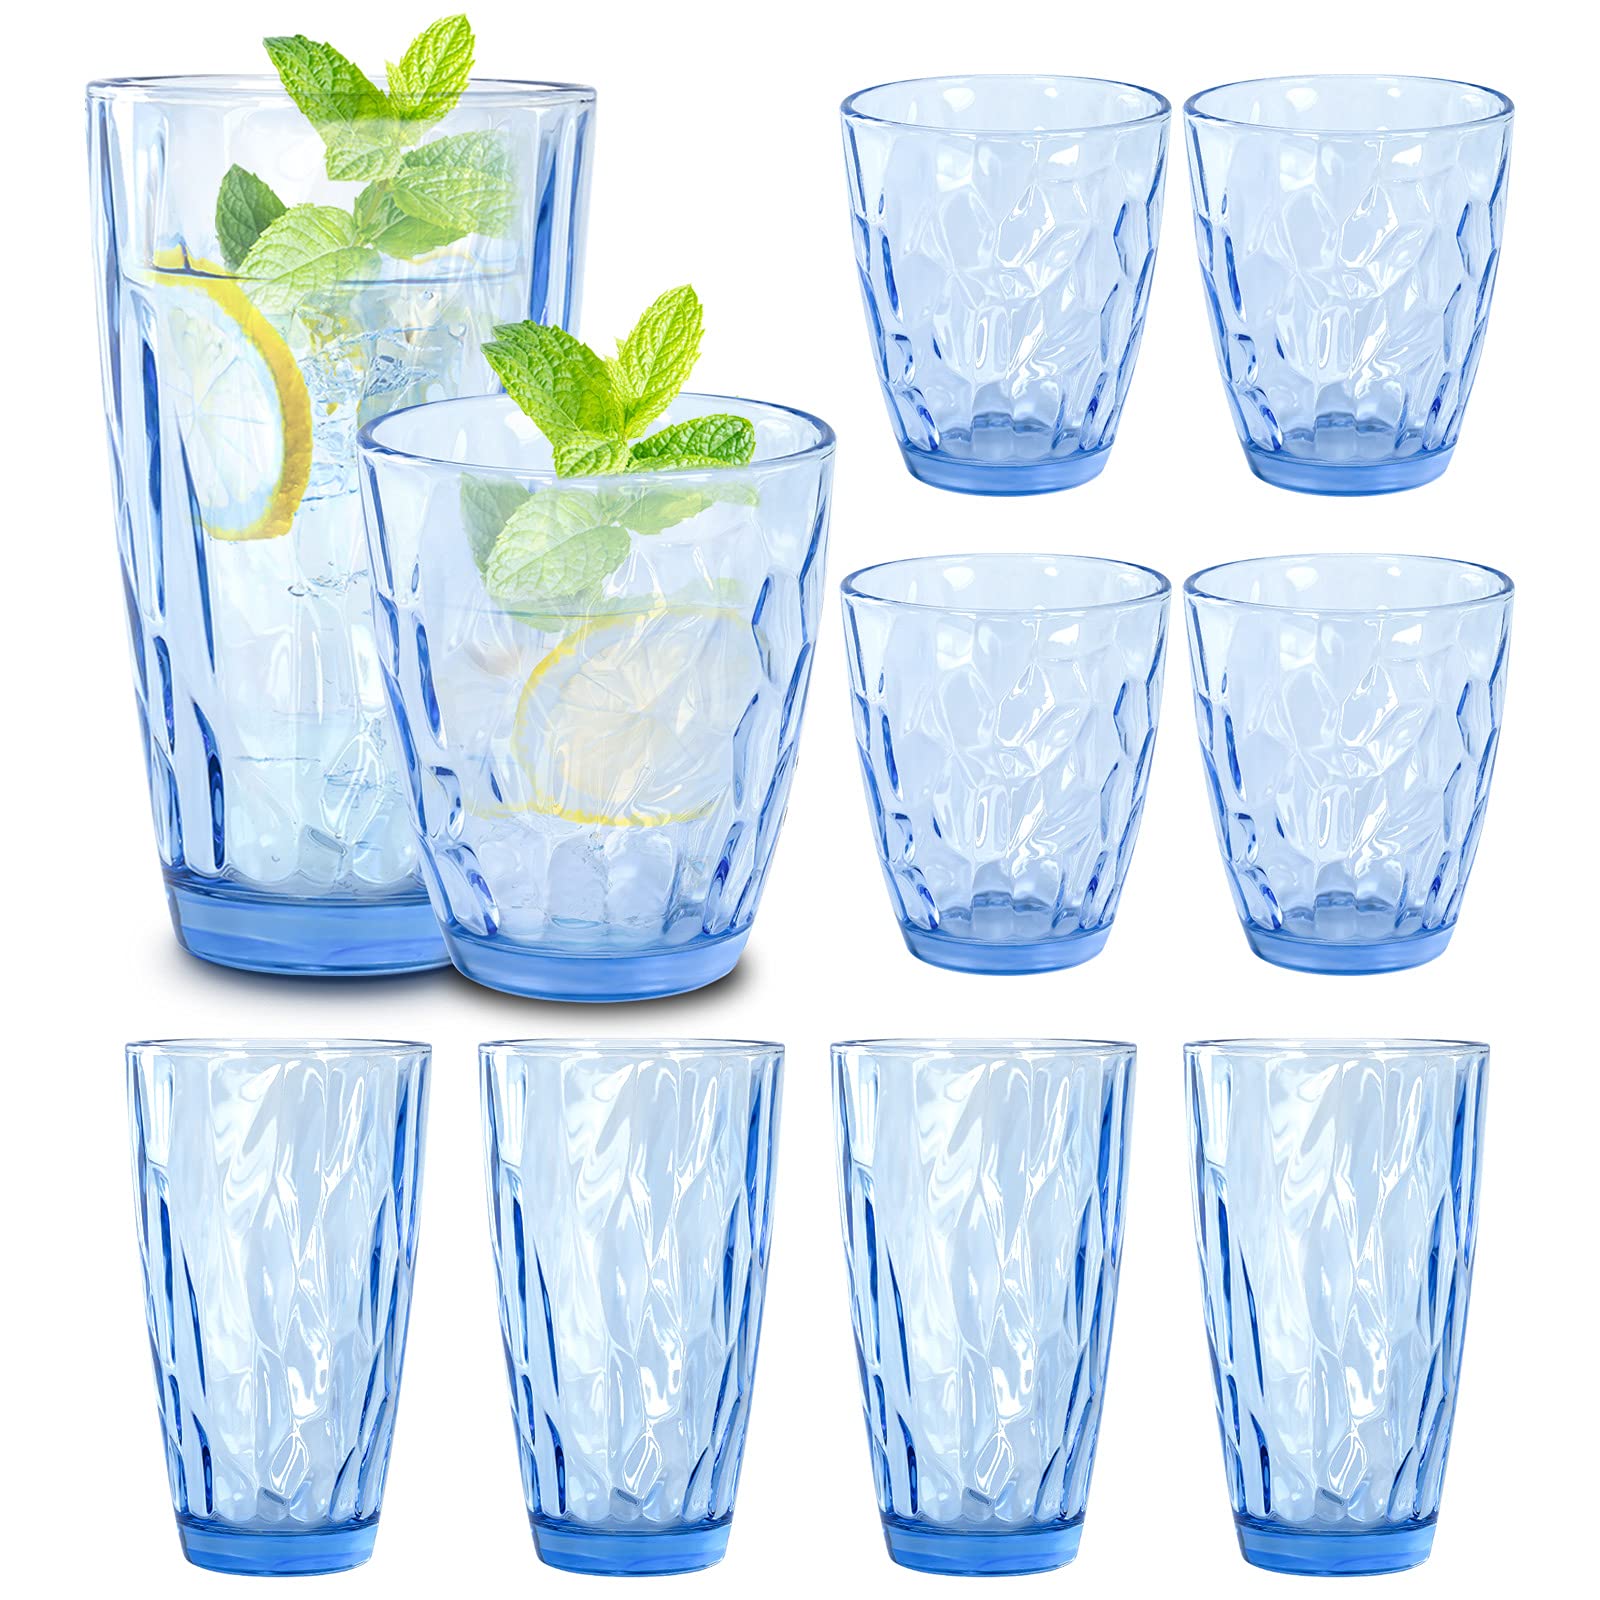 CREATIVELAND Drinking Glasses Tumbler Light Blue Set of 8, for Water,Cocktail,Juice,Beer,Iced Coffee,Clear Blue Glassware for Kitchen,Thick & Heavy...